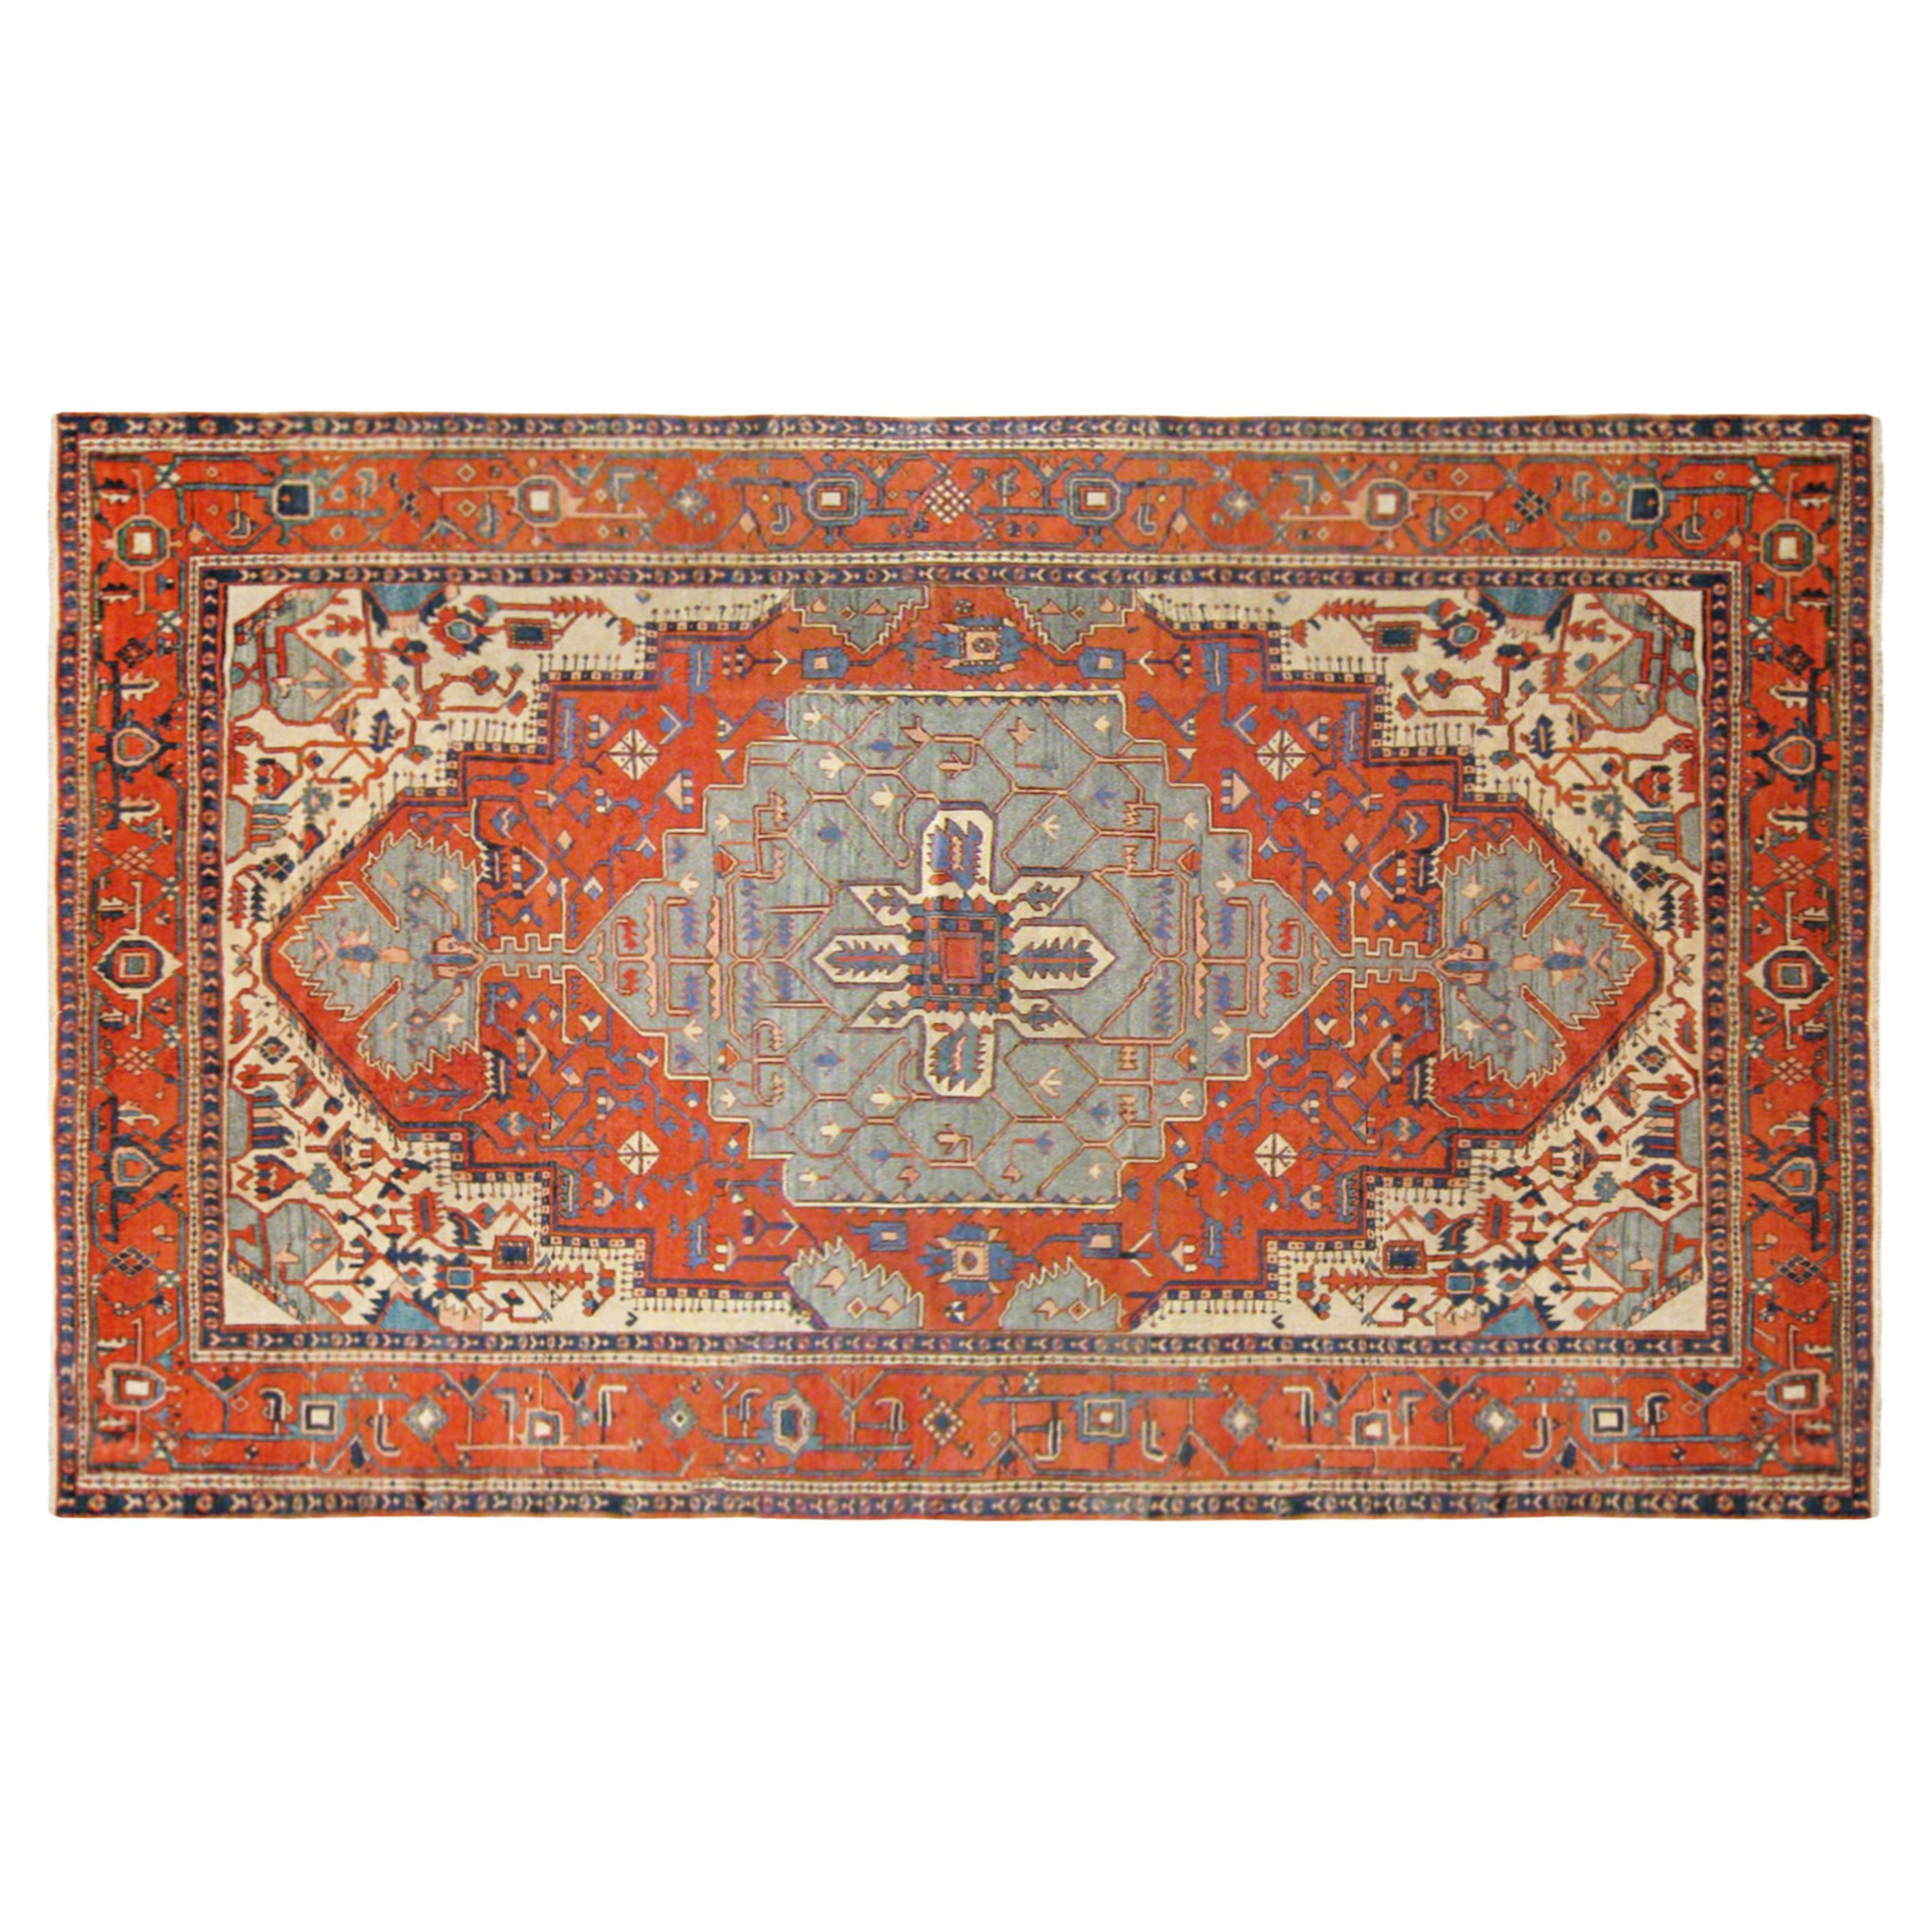 Antique Persian Serapi Oriental Carpet, in Large Size, with Central Medallion